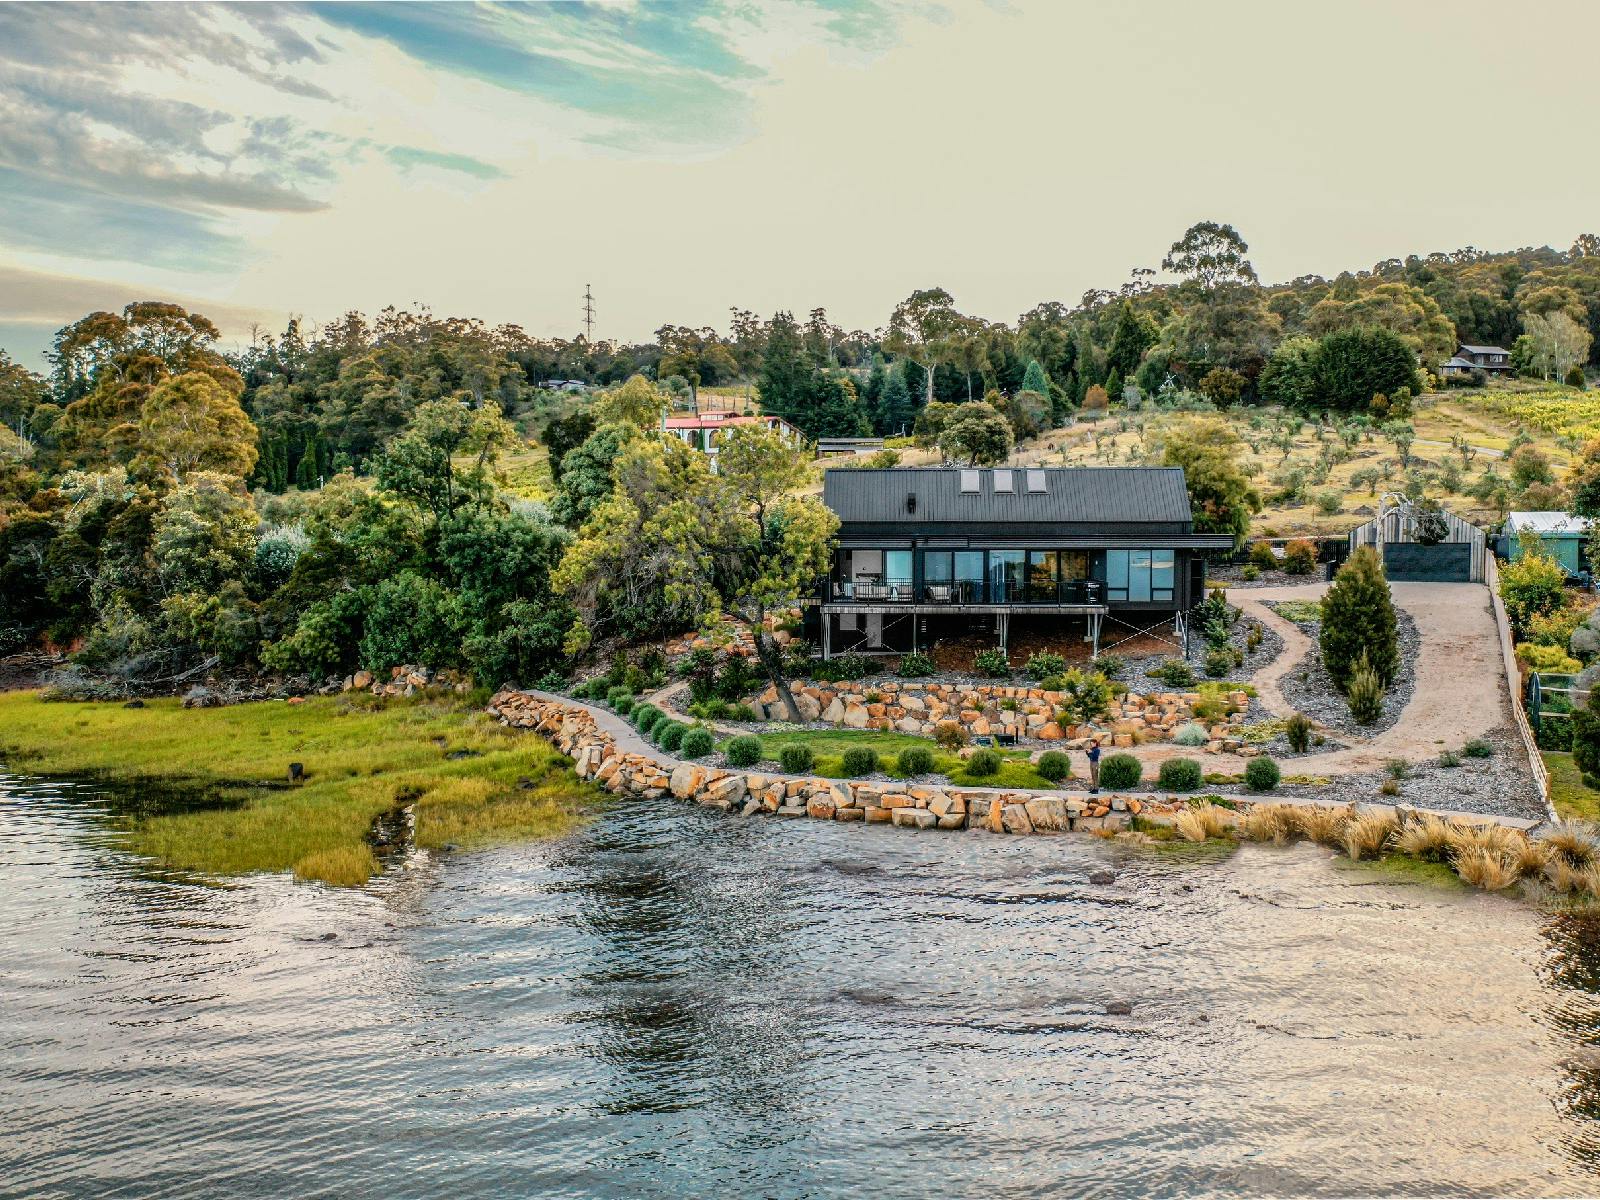 This is a stunning shot of the full view of the property from the river